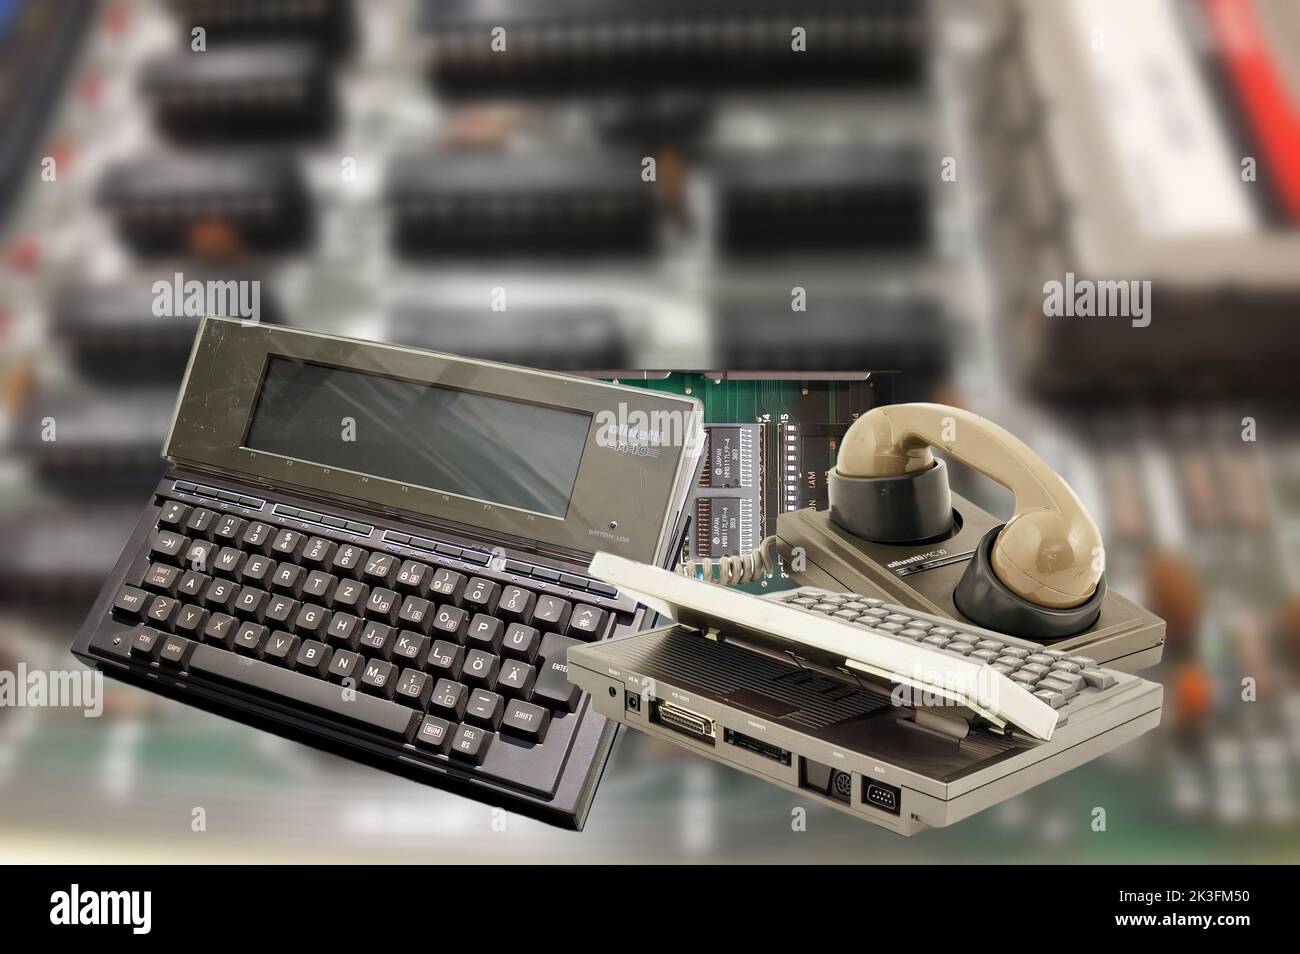 The Olivetti M10 is one of the first personal laptops developed by Olivetti in 1983. Stock Photo